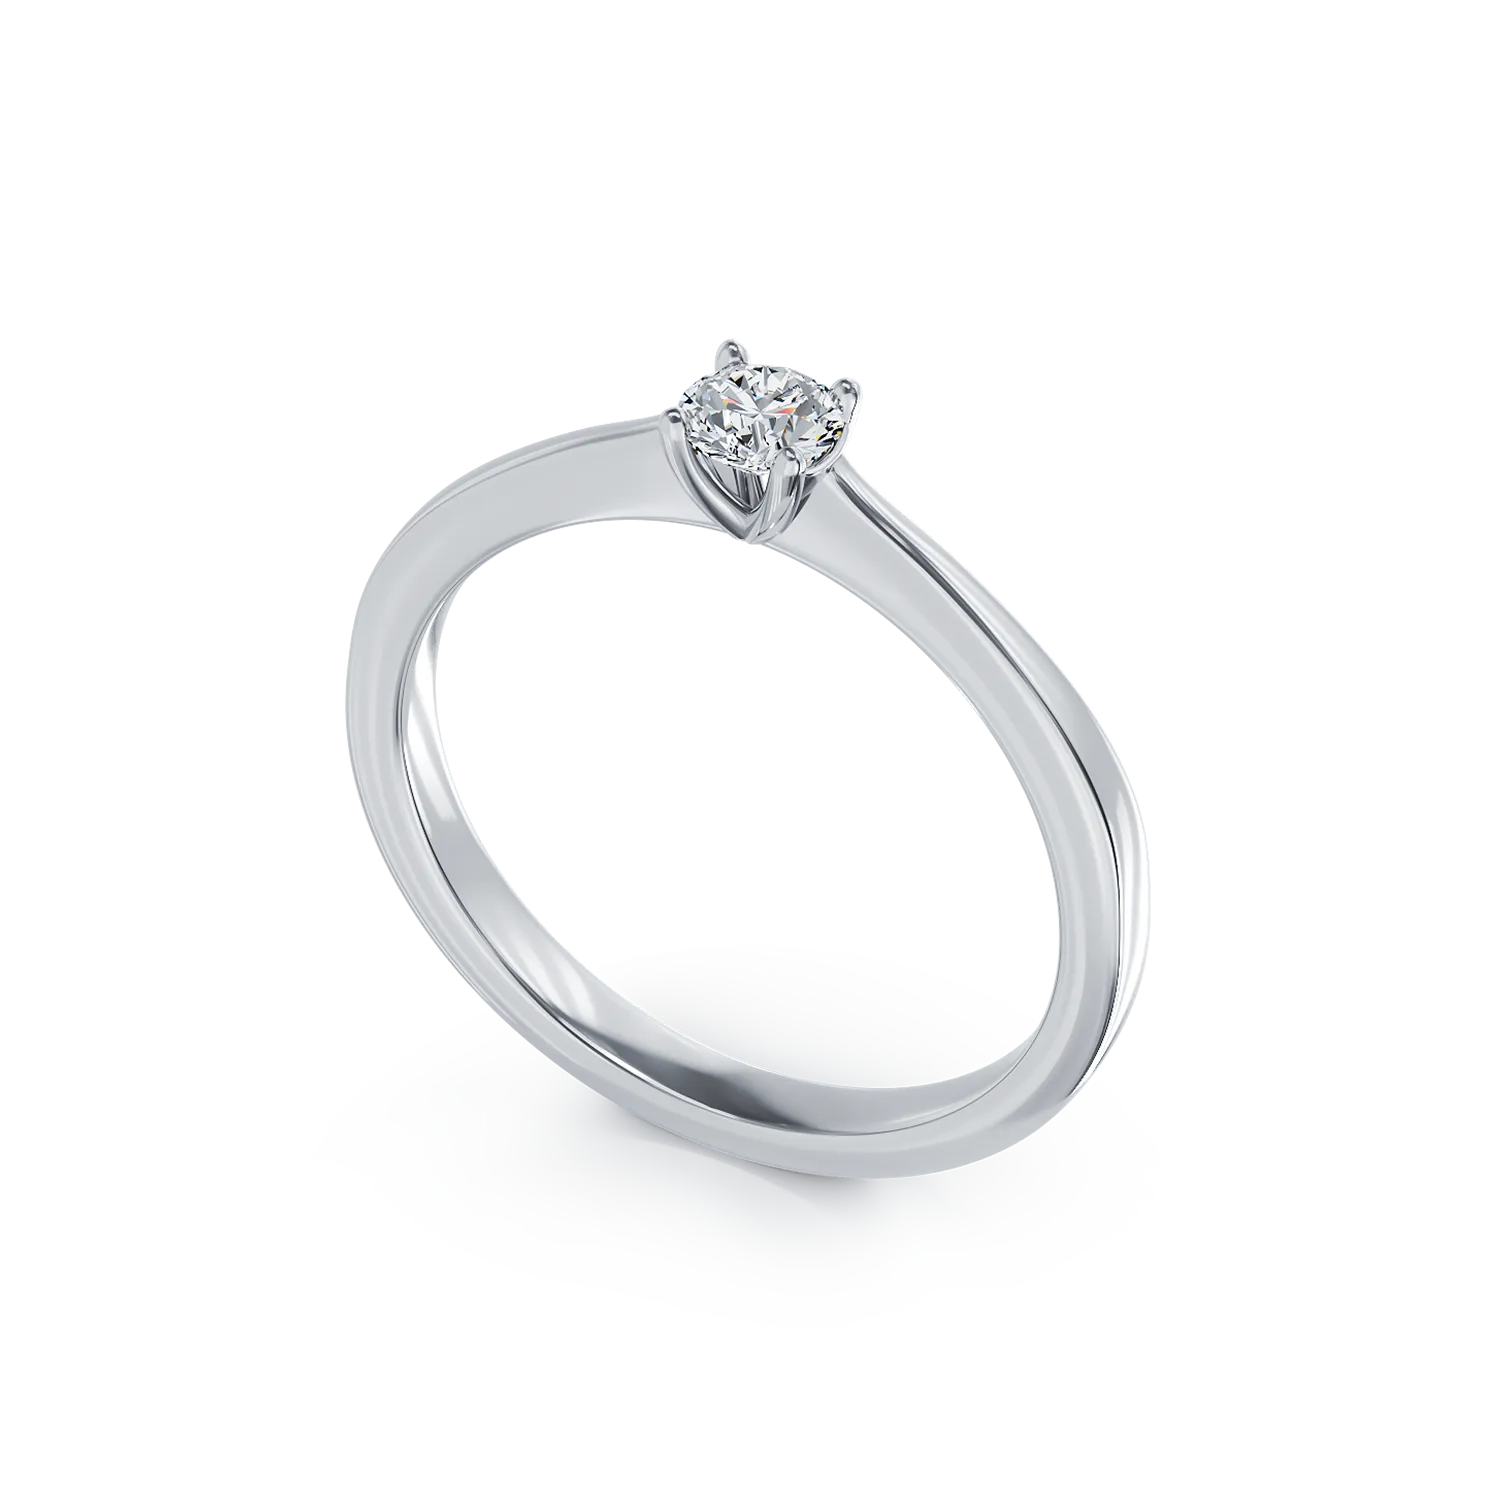 18K white gold engagement ring with a 0.295ct solitaire diamond